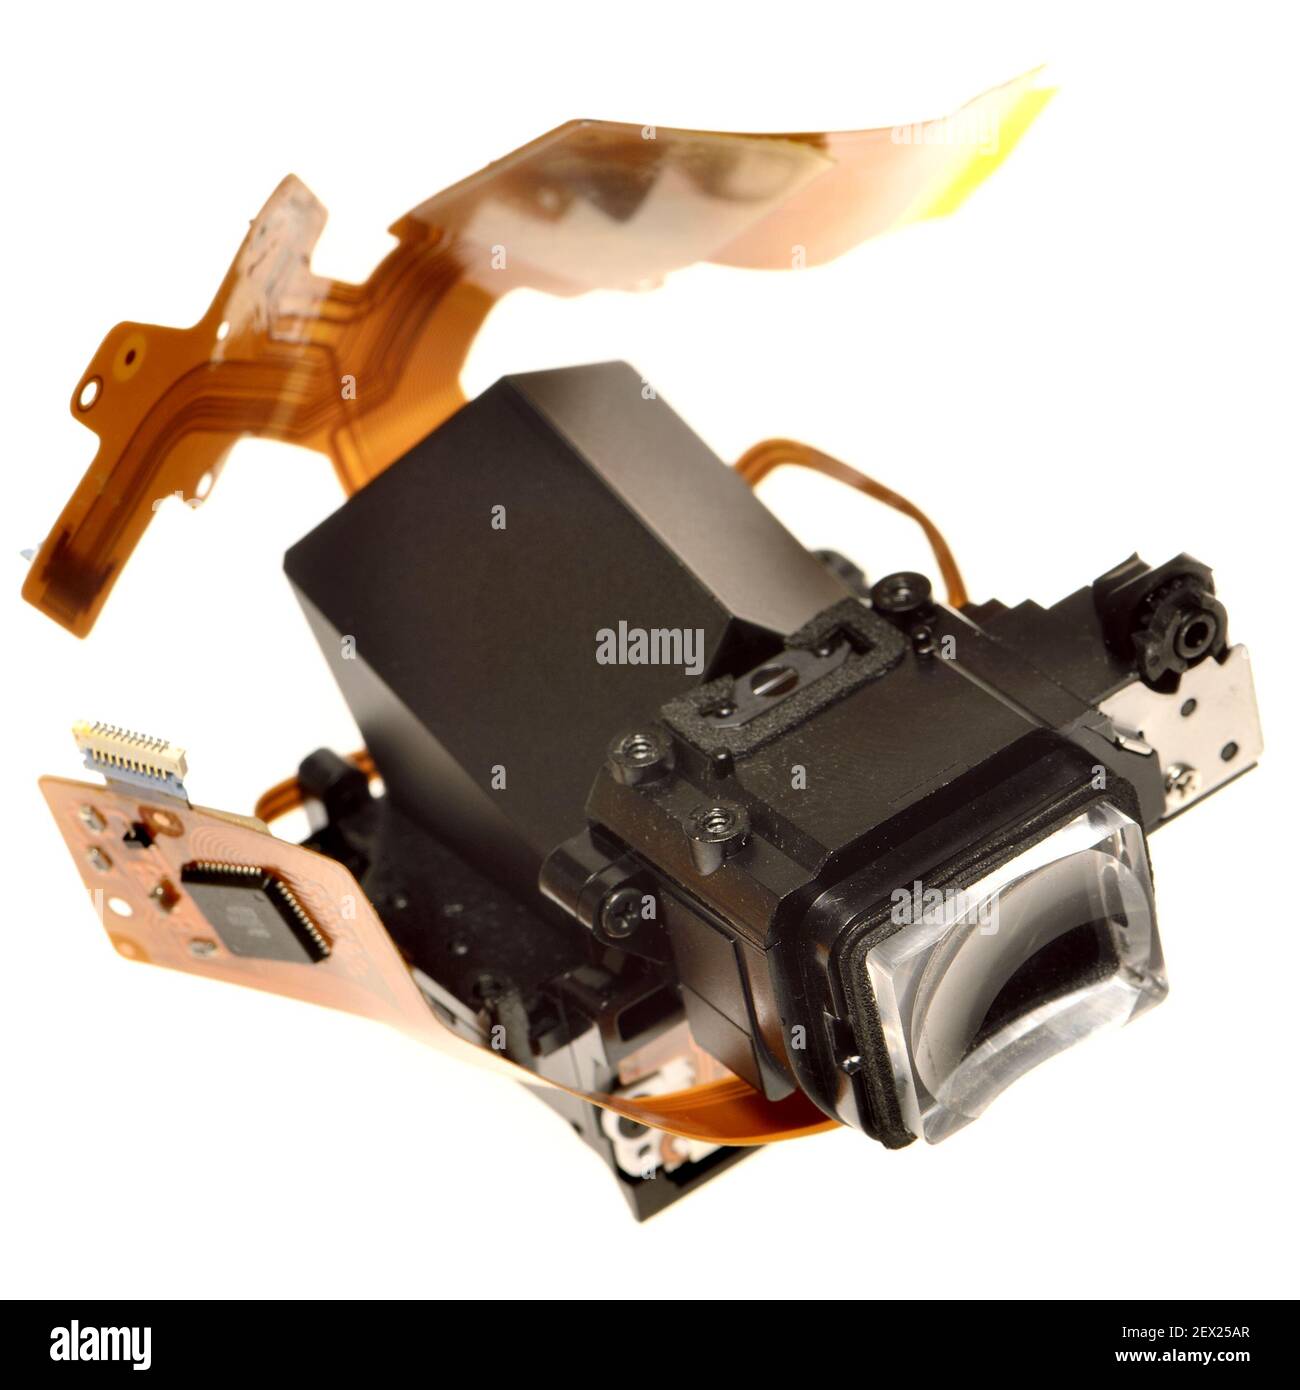 Workings of a digital camera (Nikon D200) viewfinder and pentaprism Stock Photo